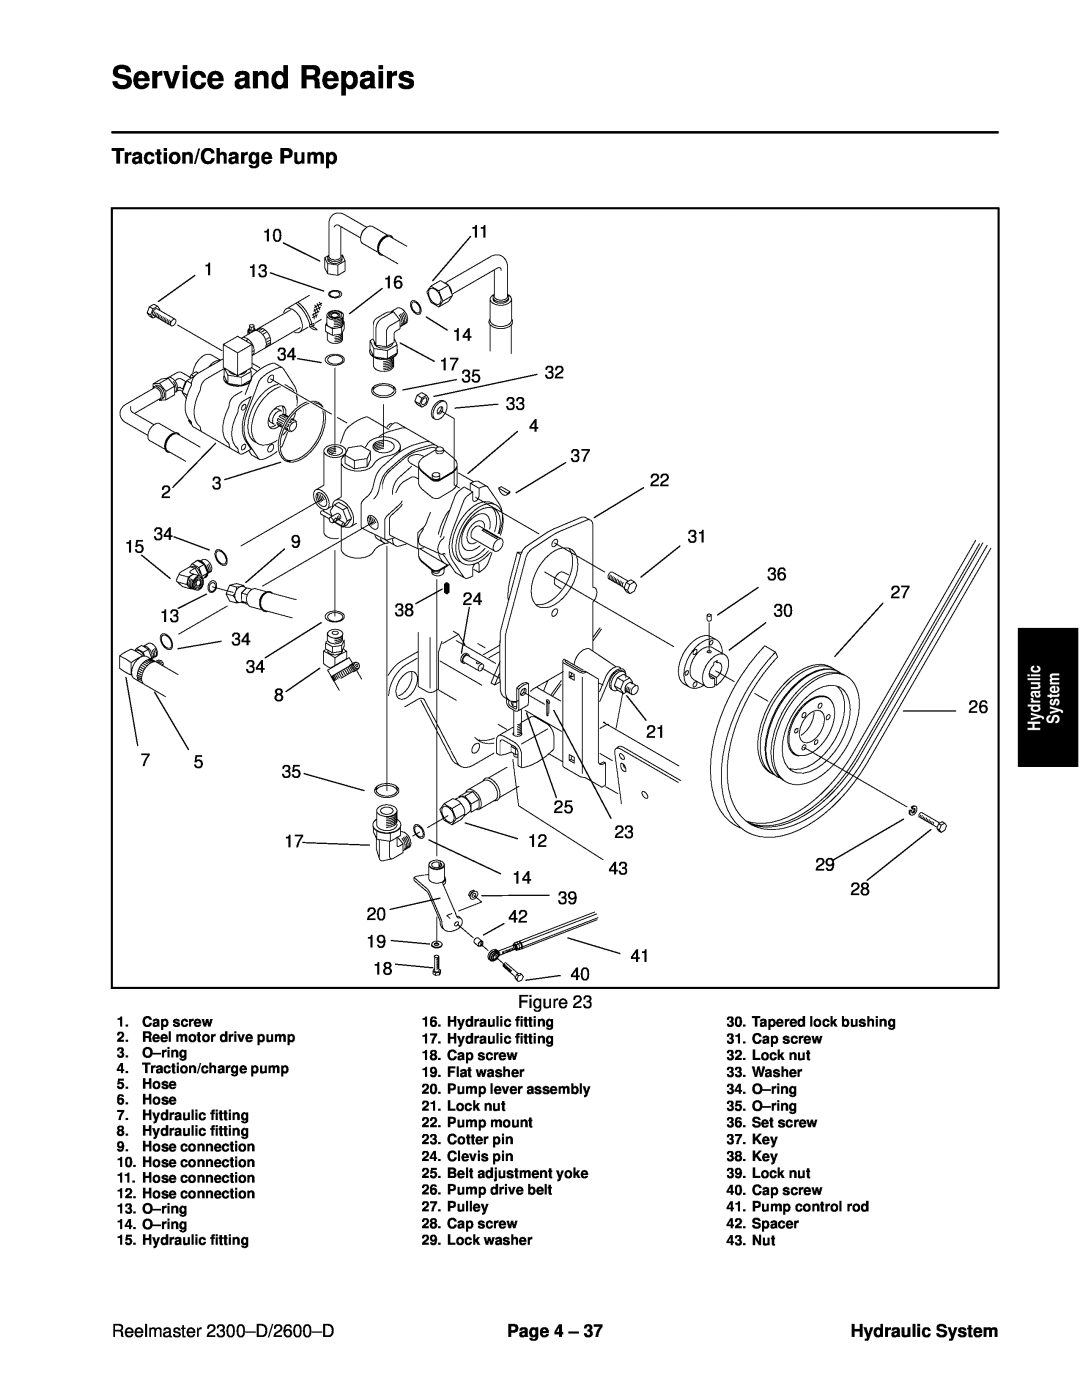 Toro 2600D, 2300-D Traction/Charge Pump, Service and Repairs, Reelmaster 2300±D/2600±D, Page 4 ±, Hydraulic System 